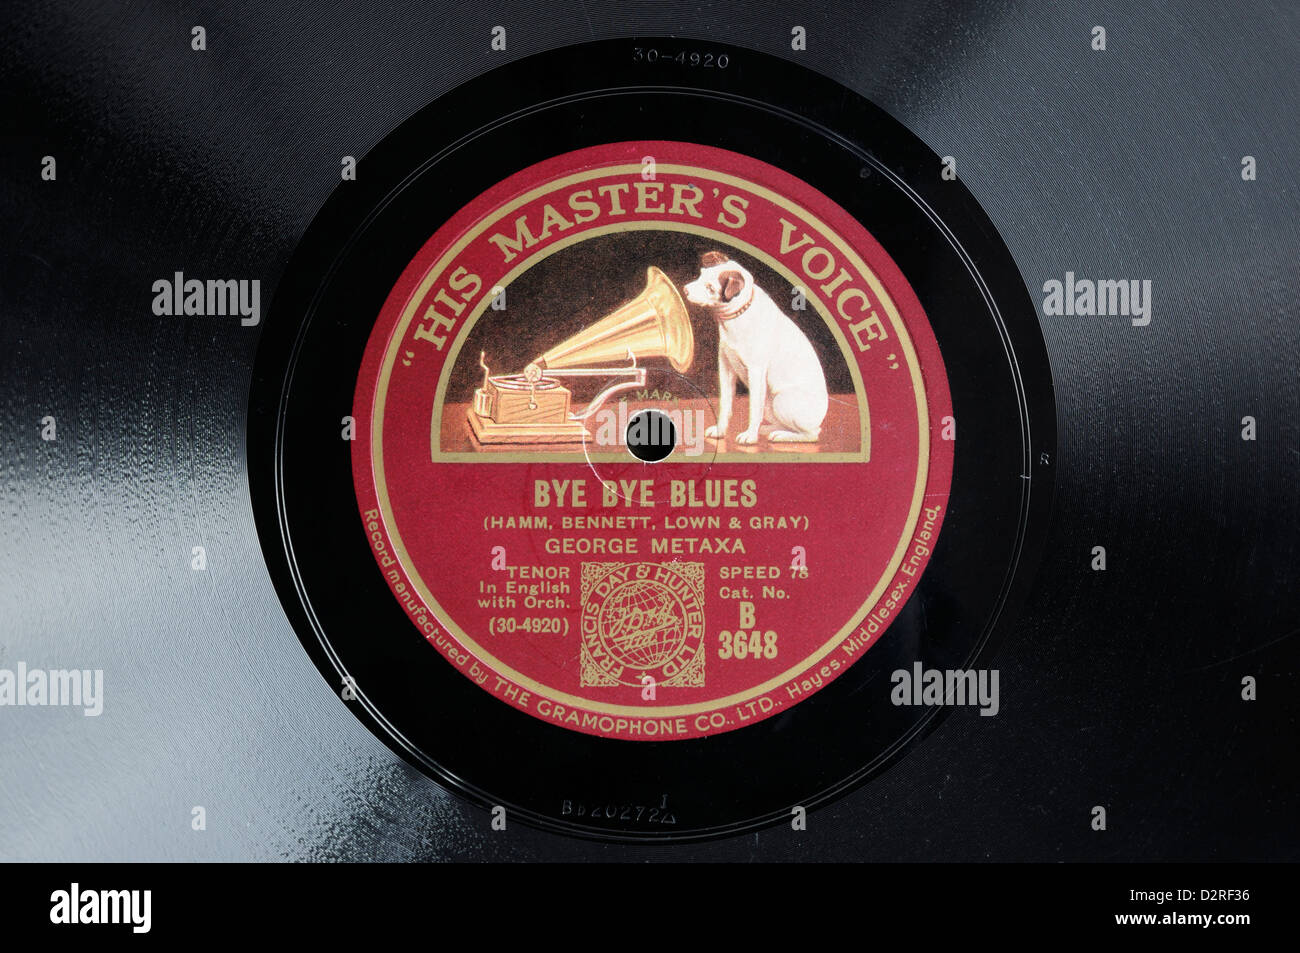 A 78 record with 'His Master's Voice' label Stock Photo